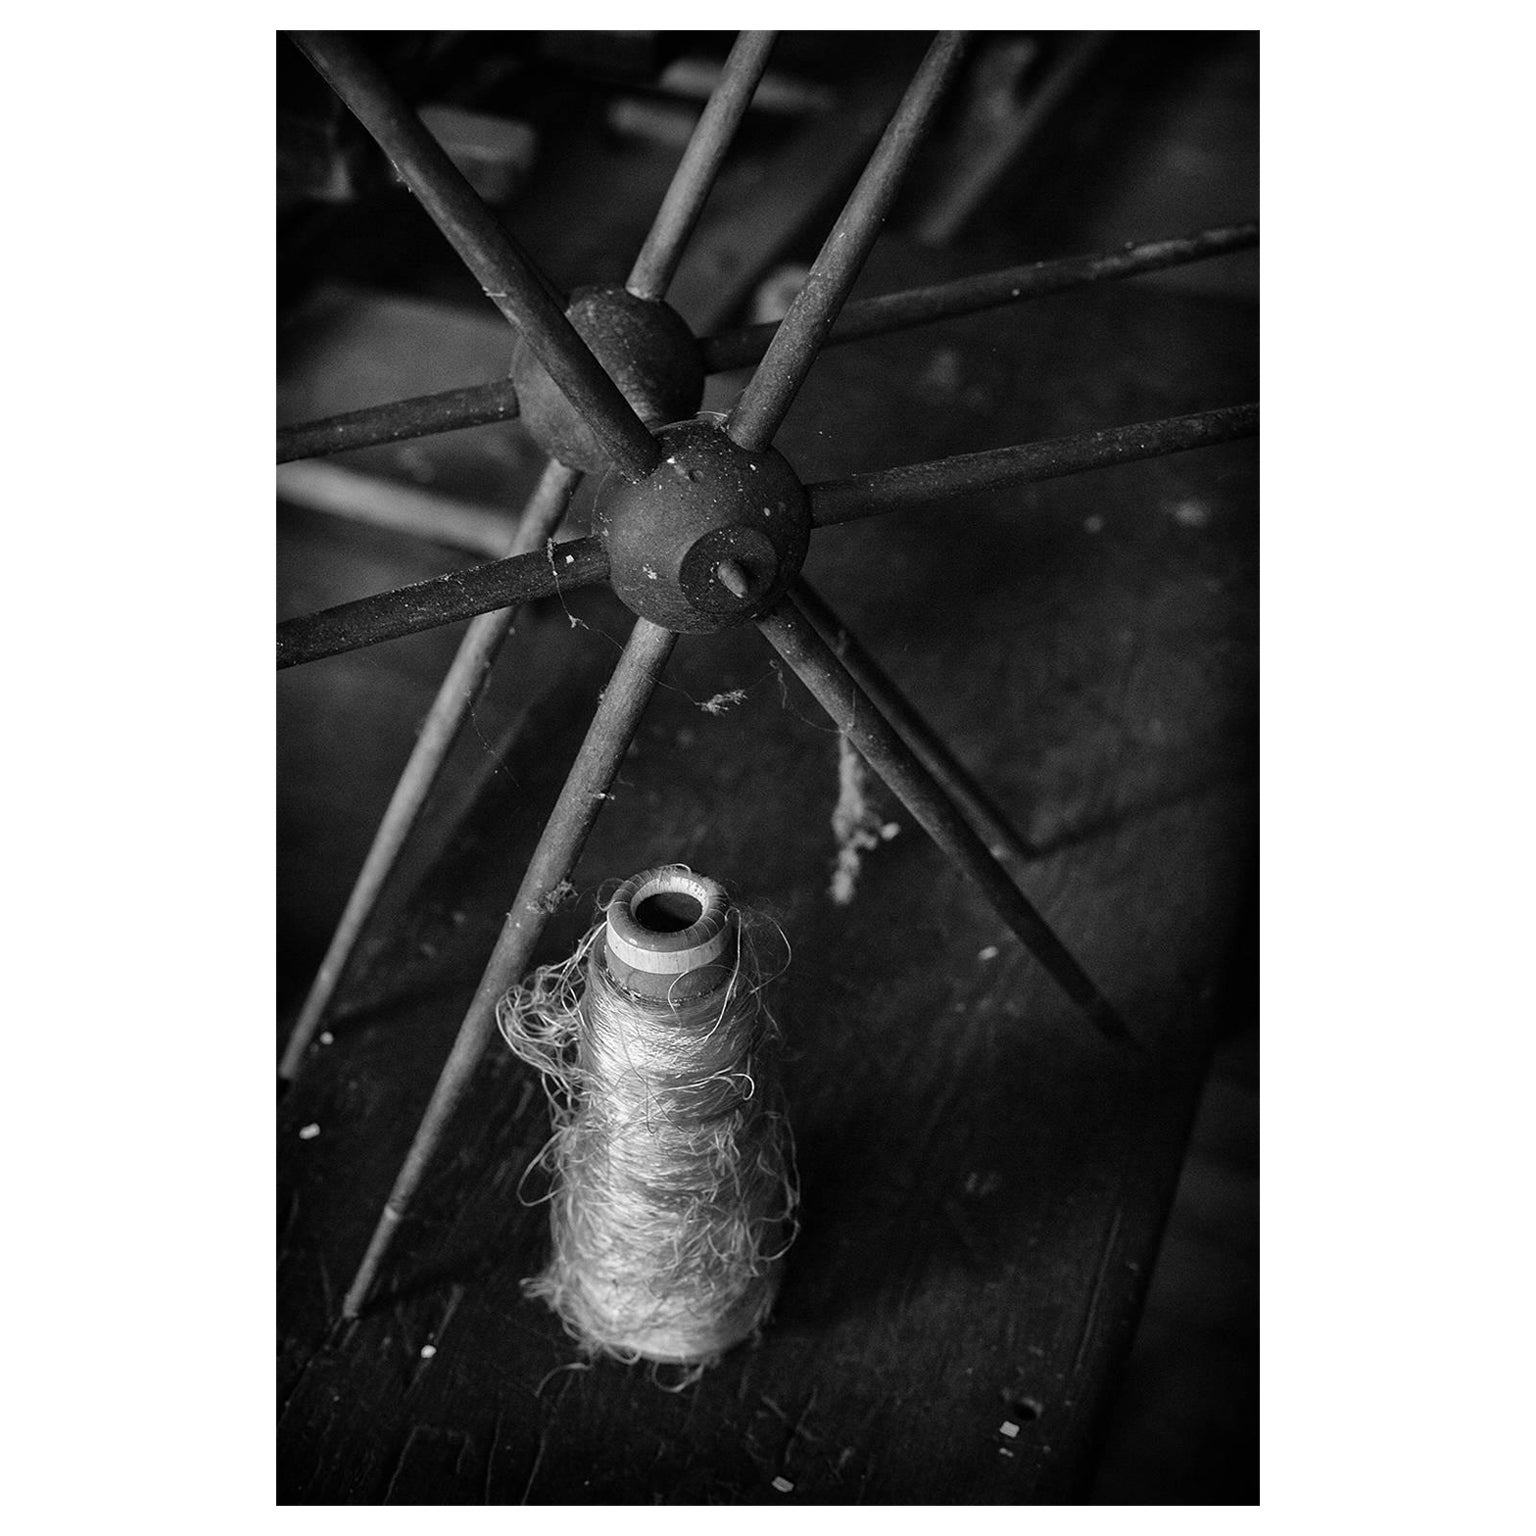 Rebecca Skinner Still-Life Photograph - "Thread", black and white, abandoned, silk mill, industrial, vintage, photograph